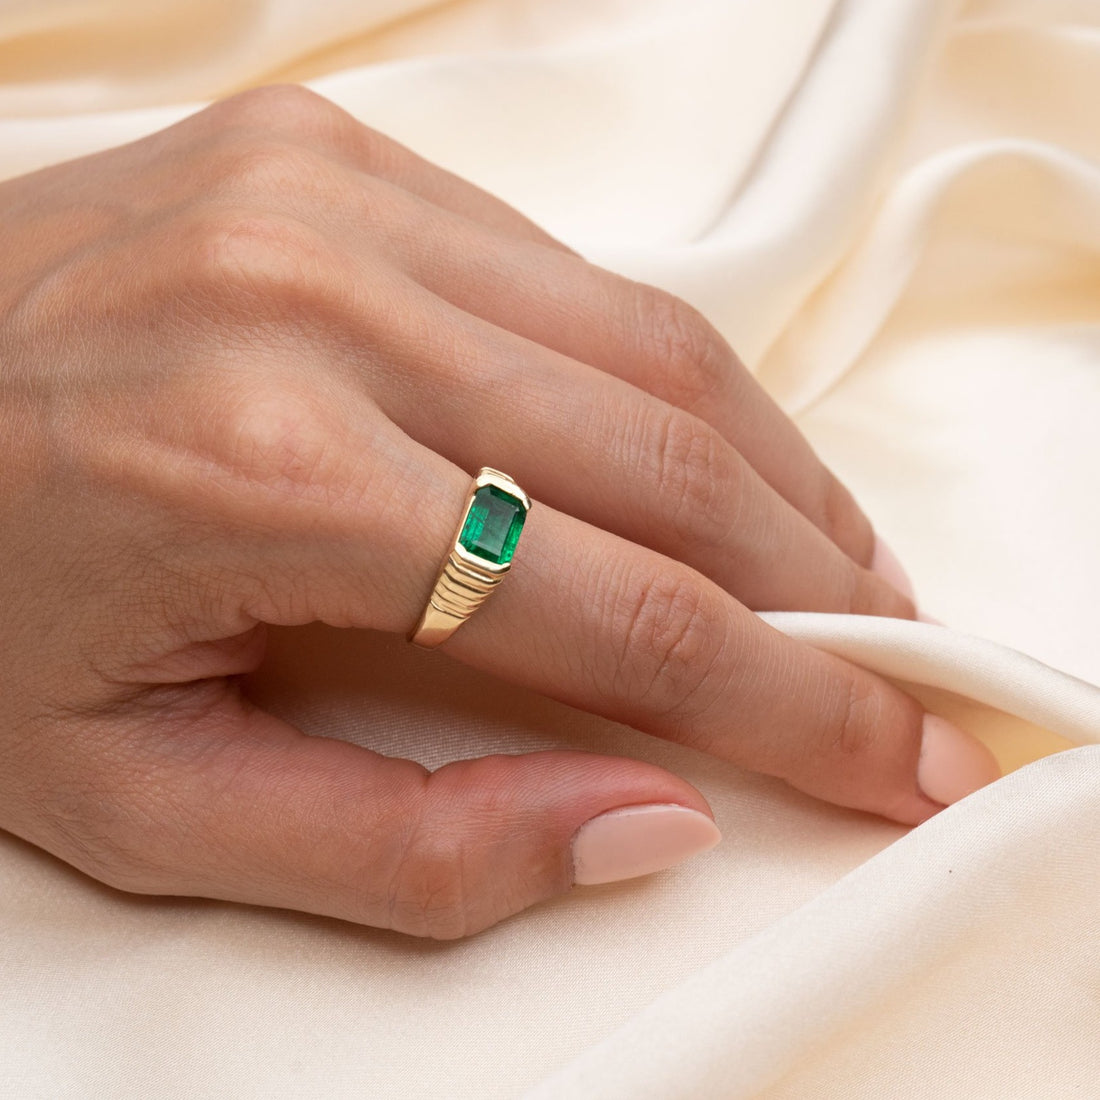 Cheap Emerald Stone Ring, Ethnic Ring, Handmade Turkish Ring, Fine Silver  Ring With Emerald and Marcasite Gemstone | Joom